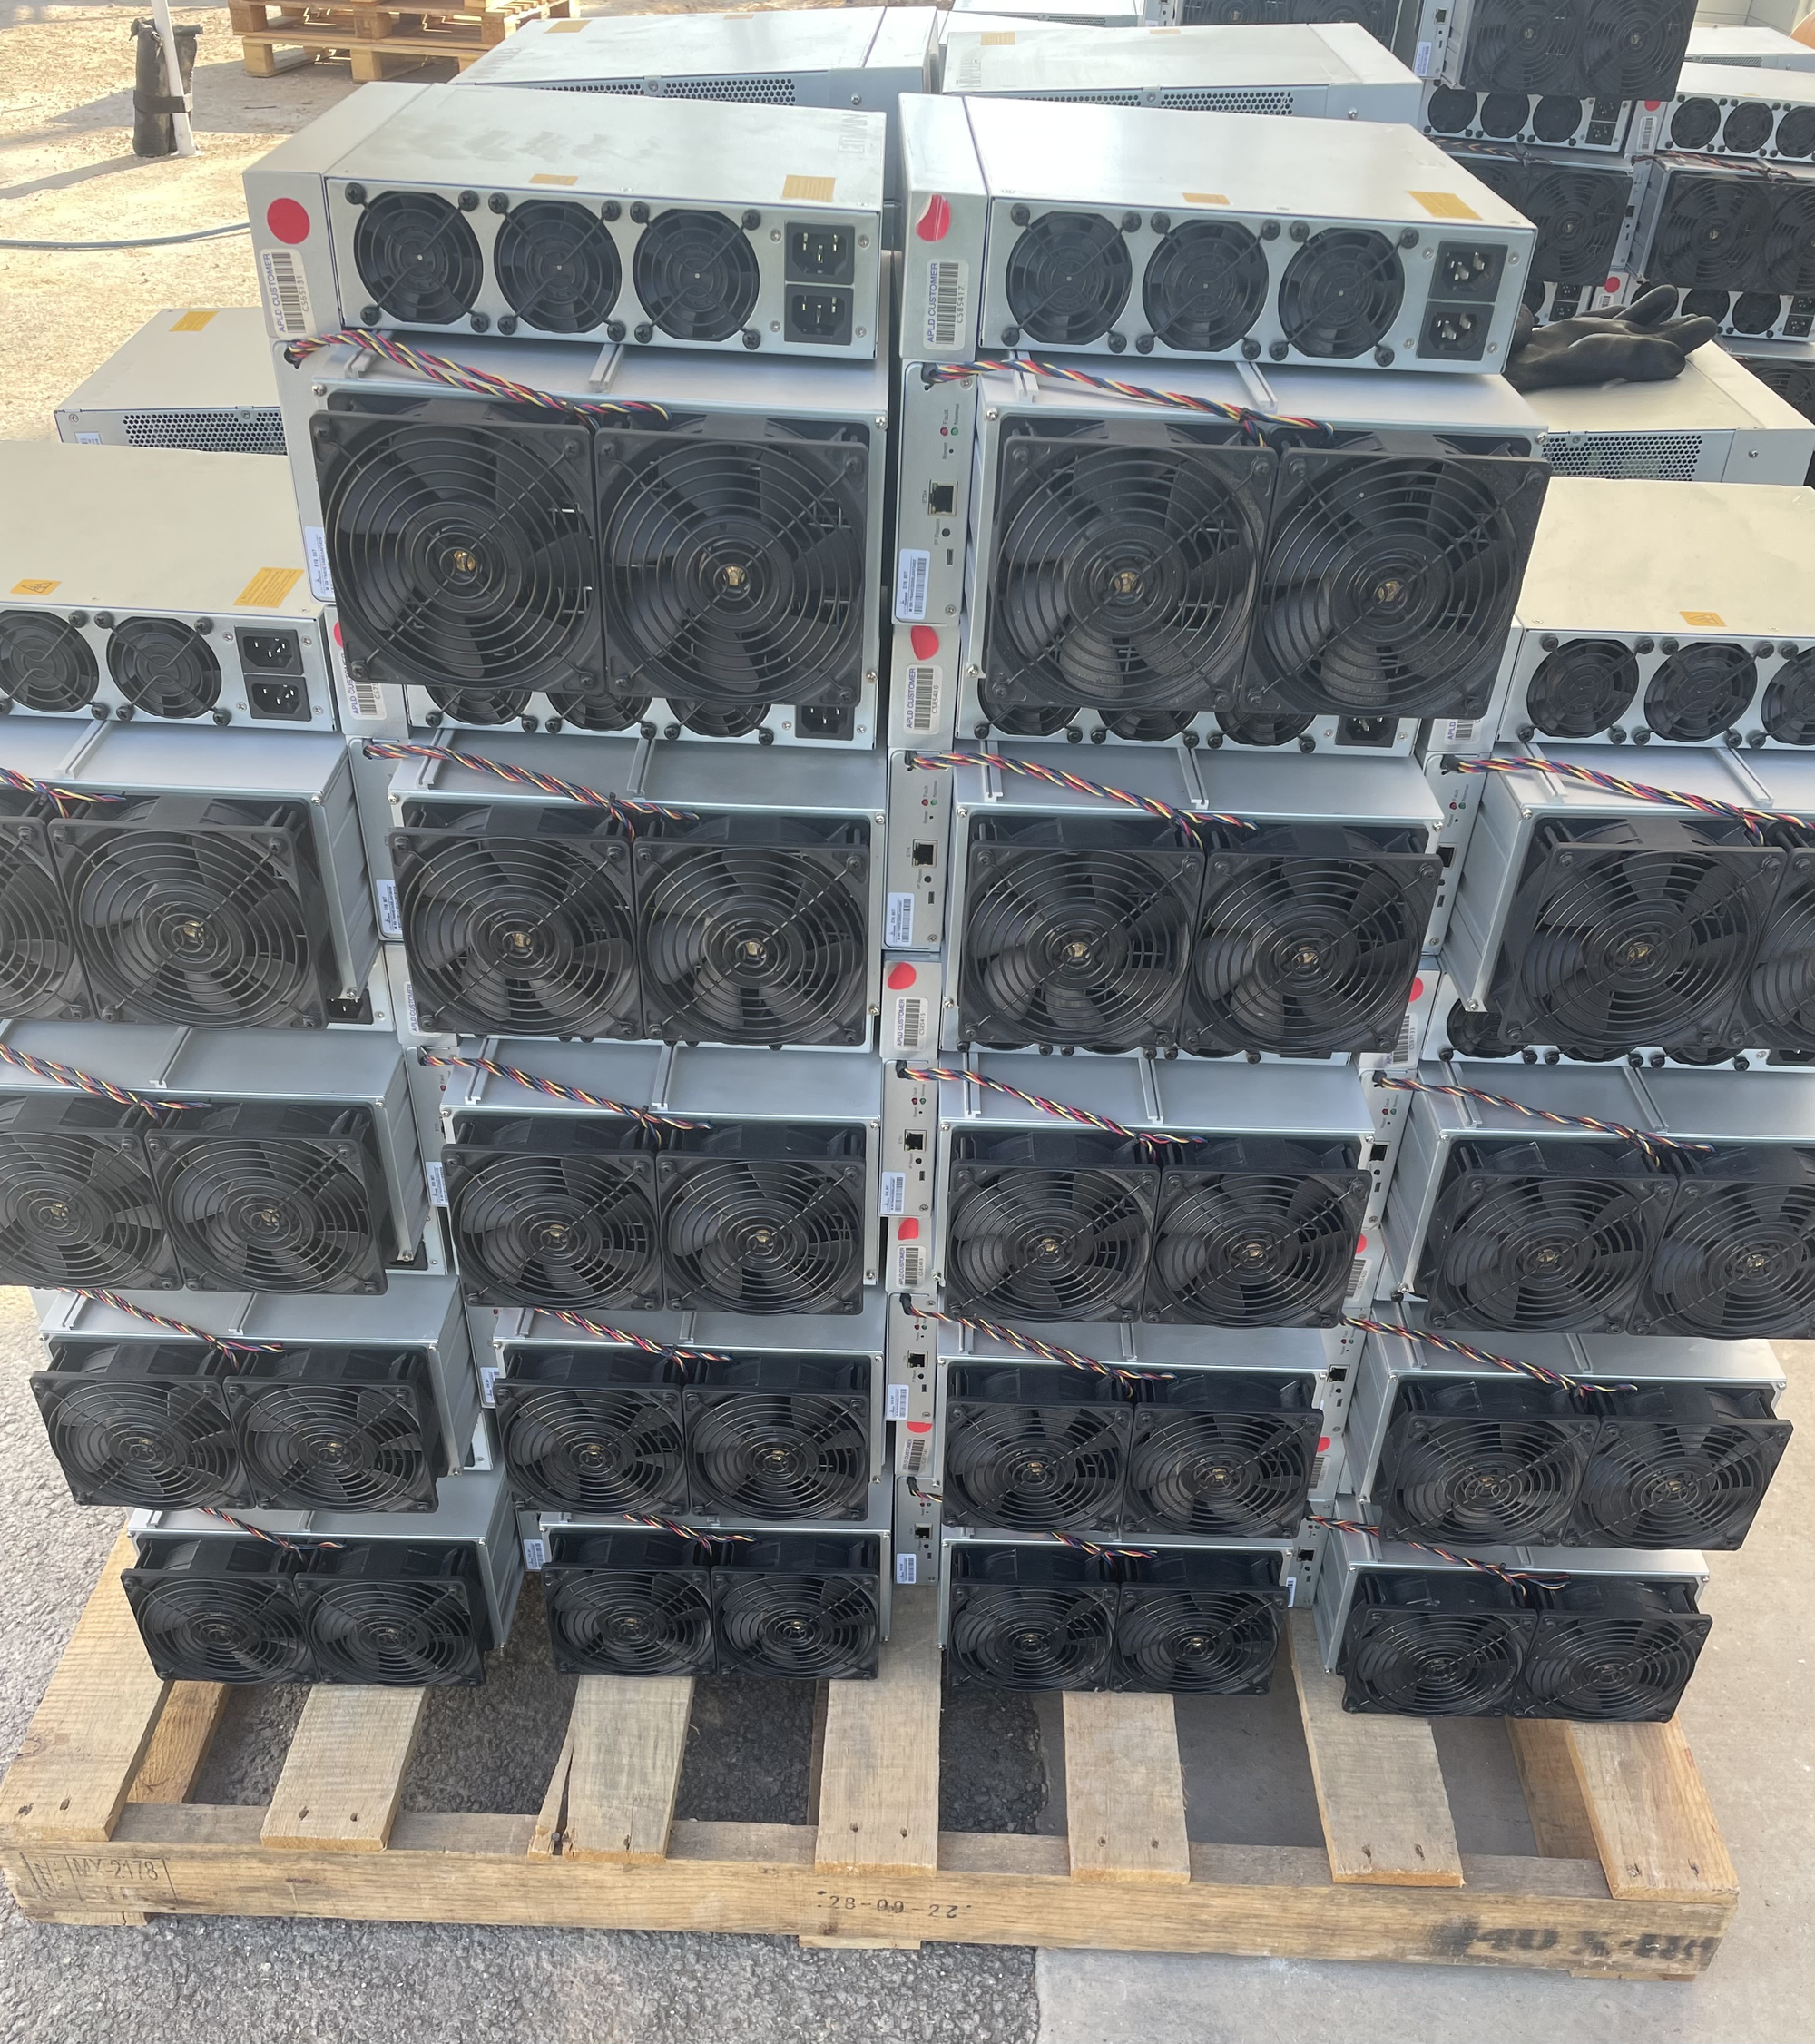 A pallet of used Antminer S19 ASIC miners